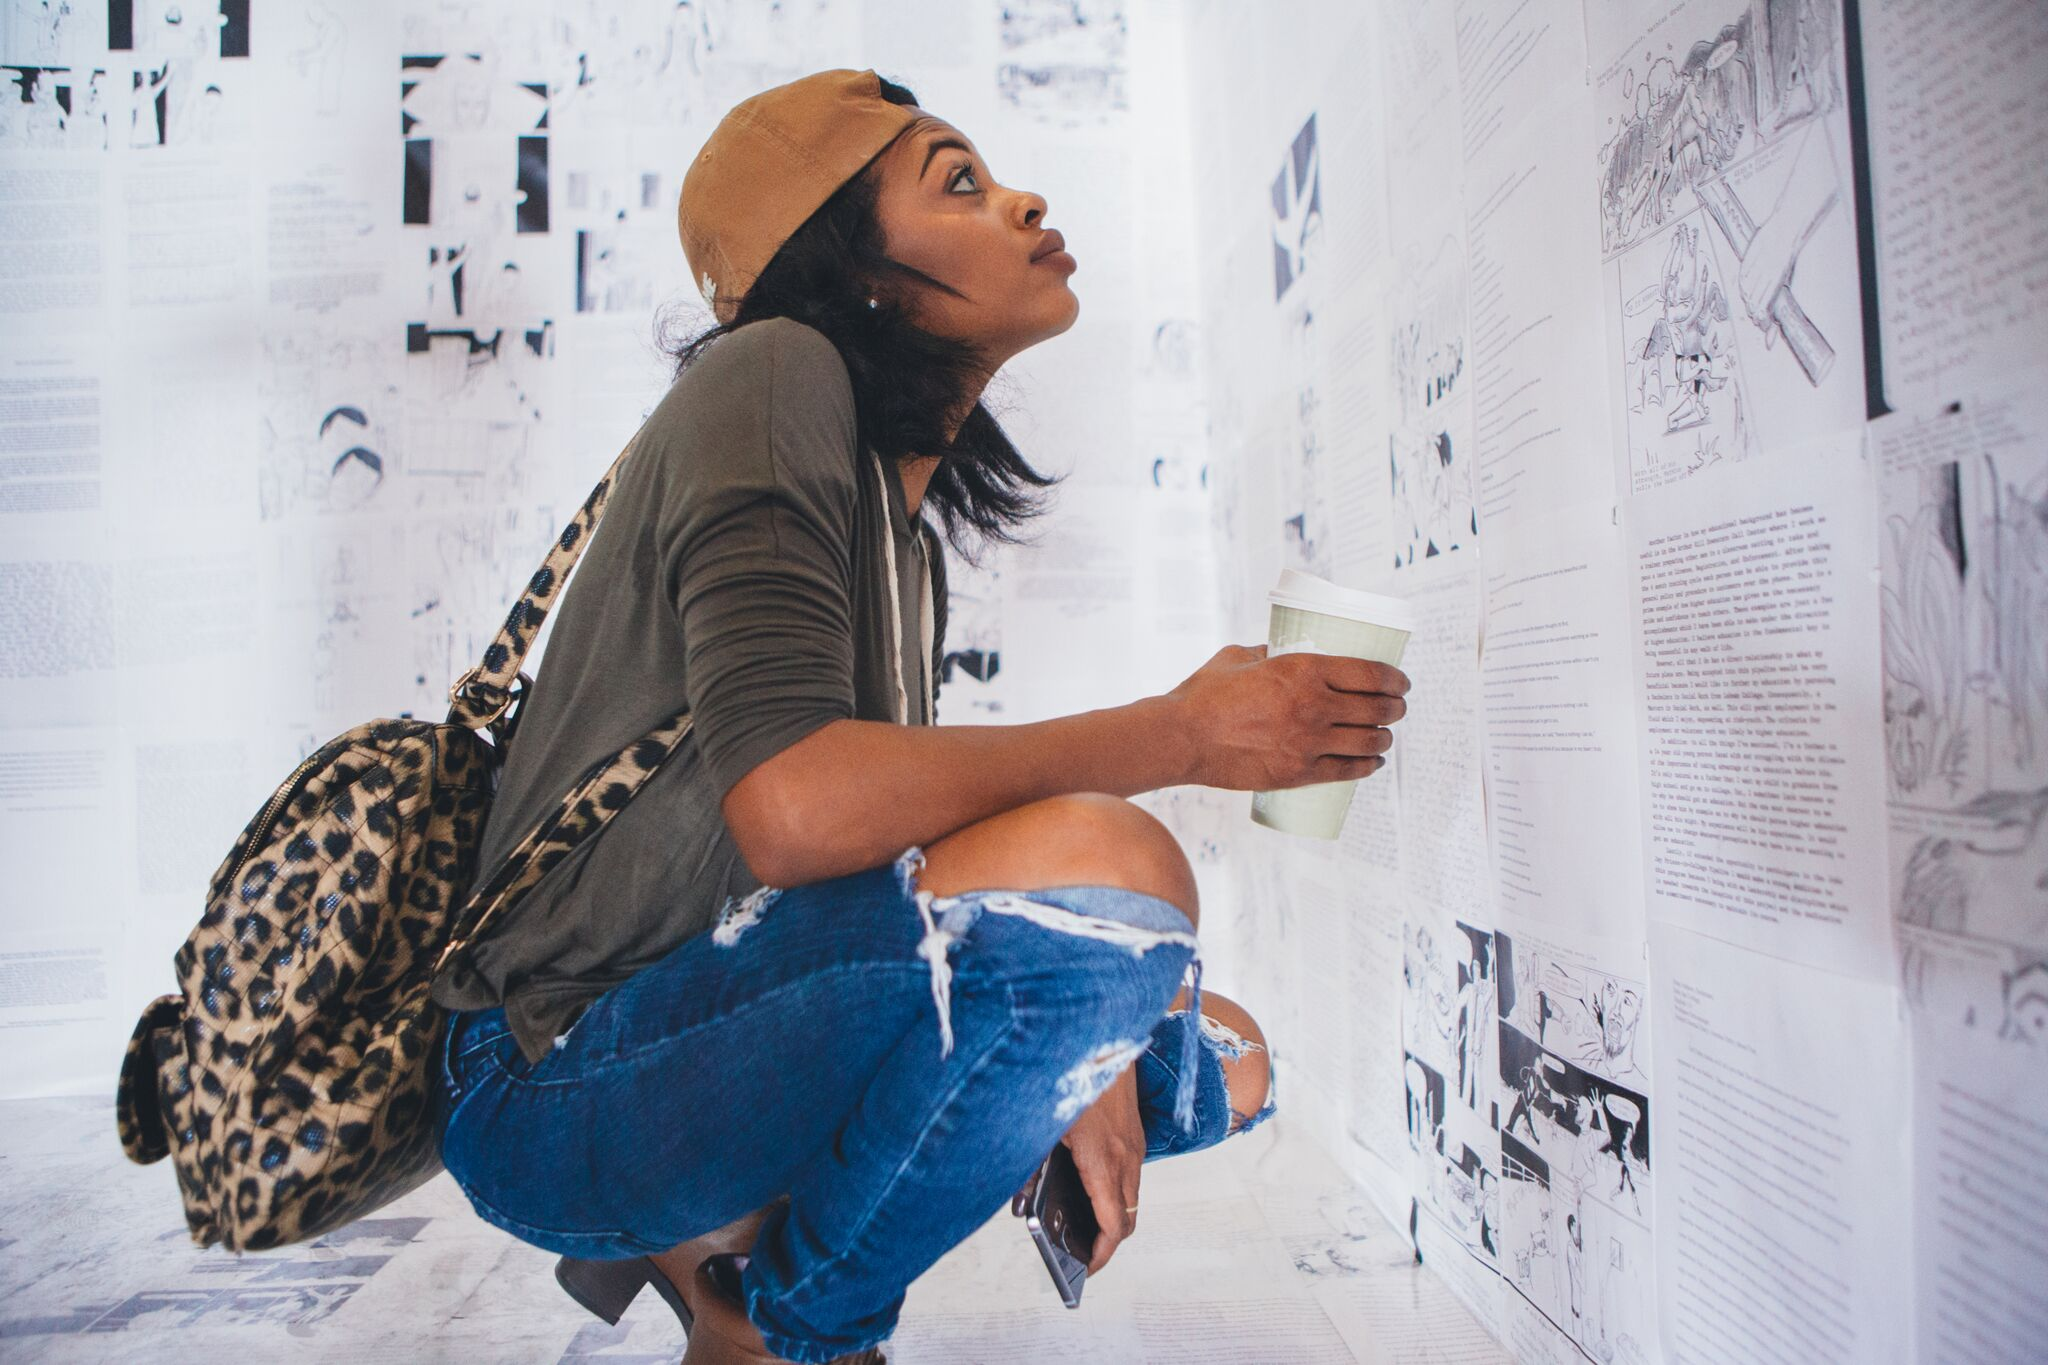 From her right side, a woman wearing jeans, an olive green long-sleeved shirt, sleeves pushed up past her elbow, a leopard-print backpack, and a tan cap, squats and looks intently upwards and towards the right, towards the artwork - black and white text, images, and drawings - like pages of a book - plastered against the wall in front of her behind her, and reflected on the white floor below her.